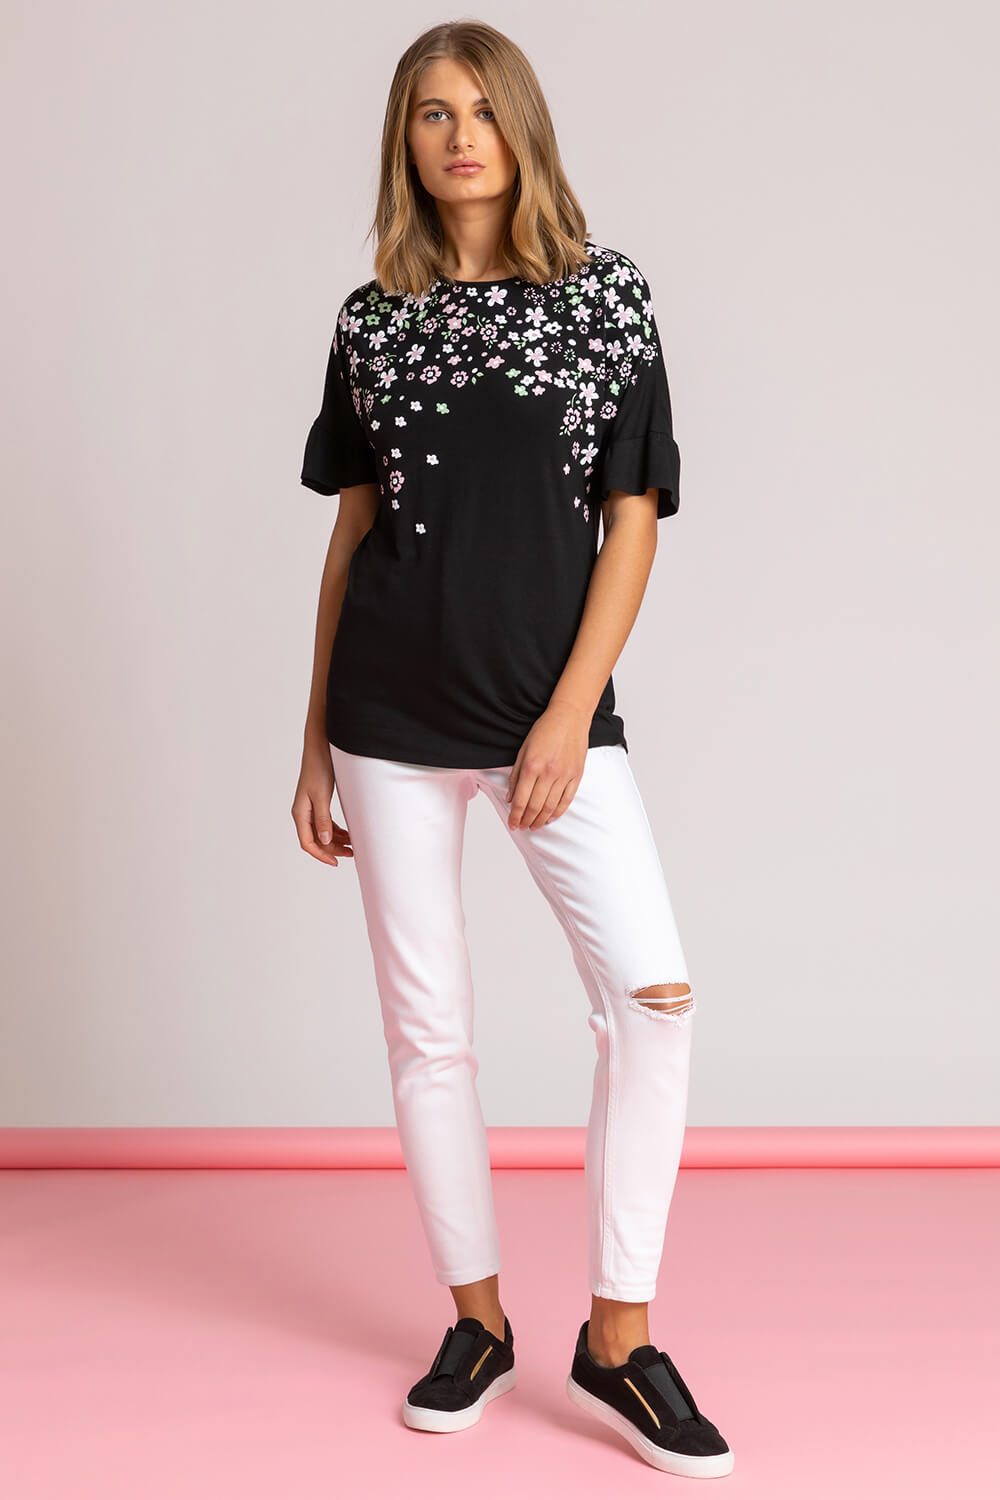 Black Floral Print Frill Sleeve Top, Image 3 of 5